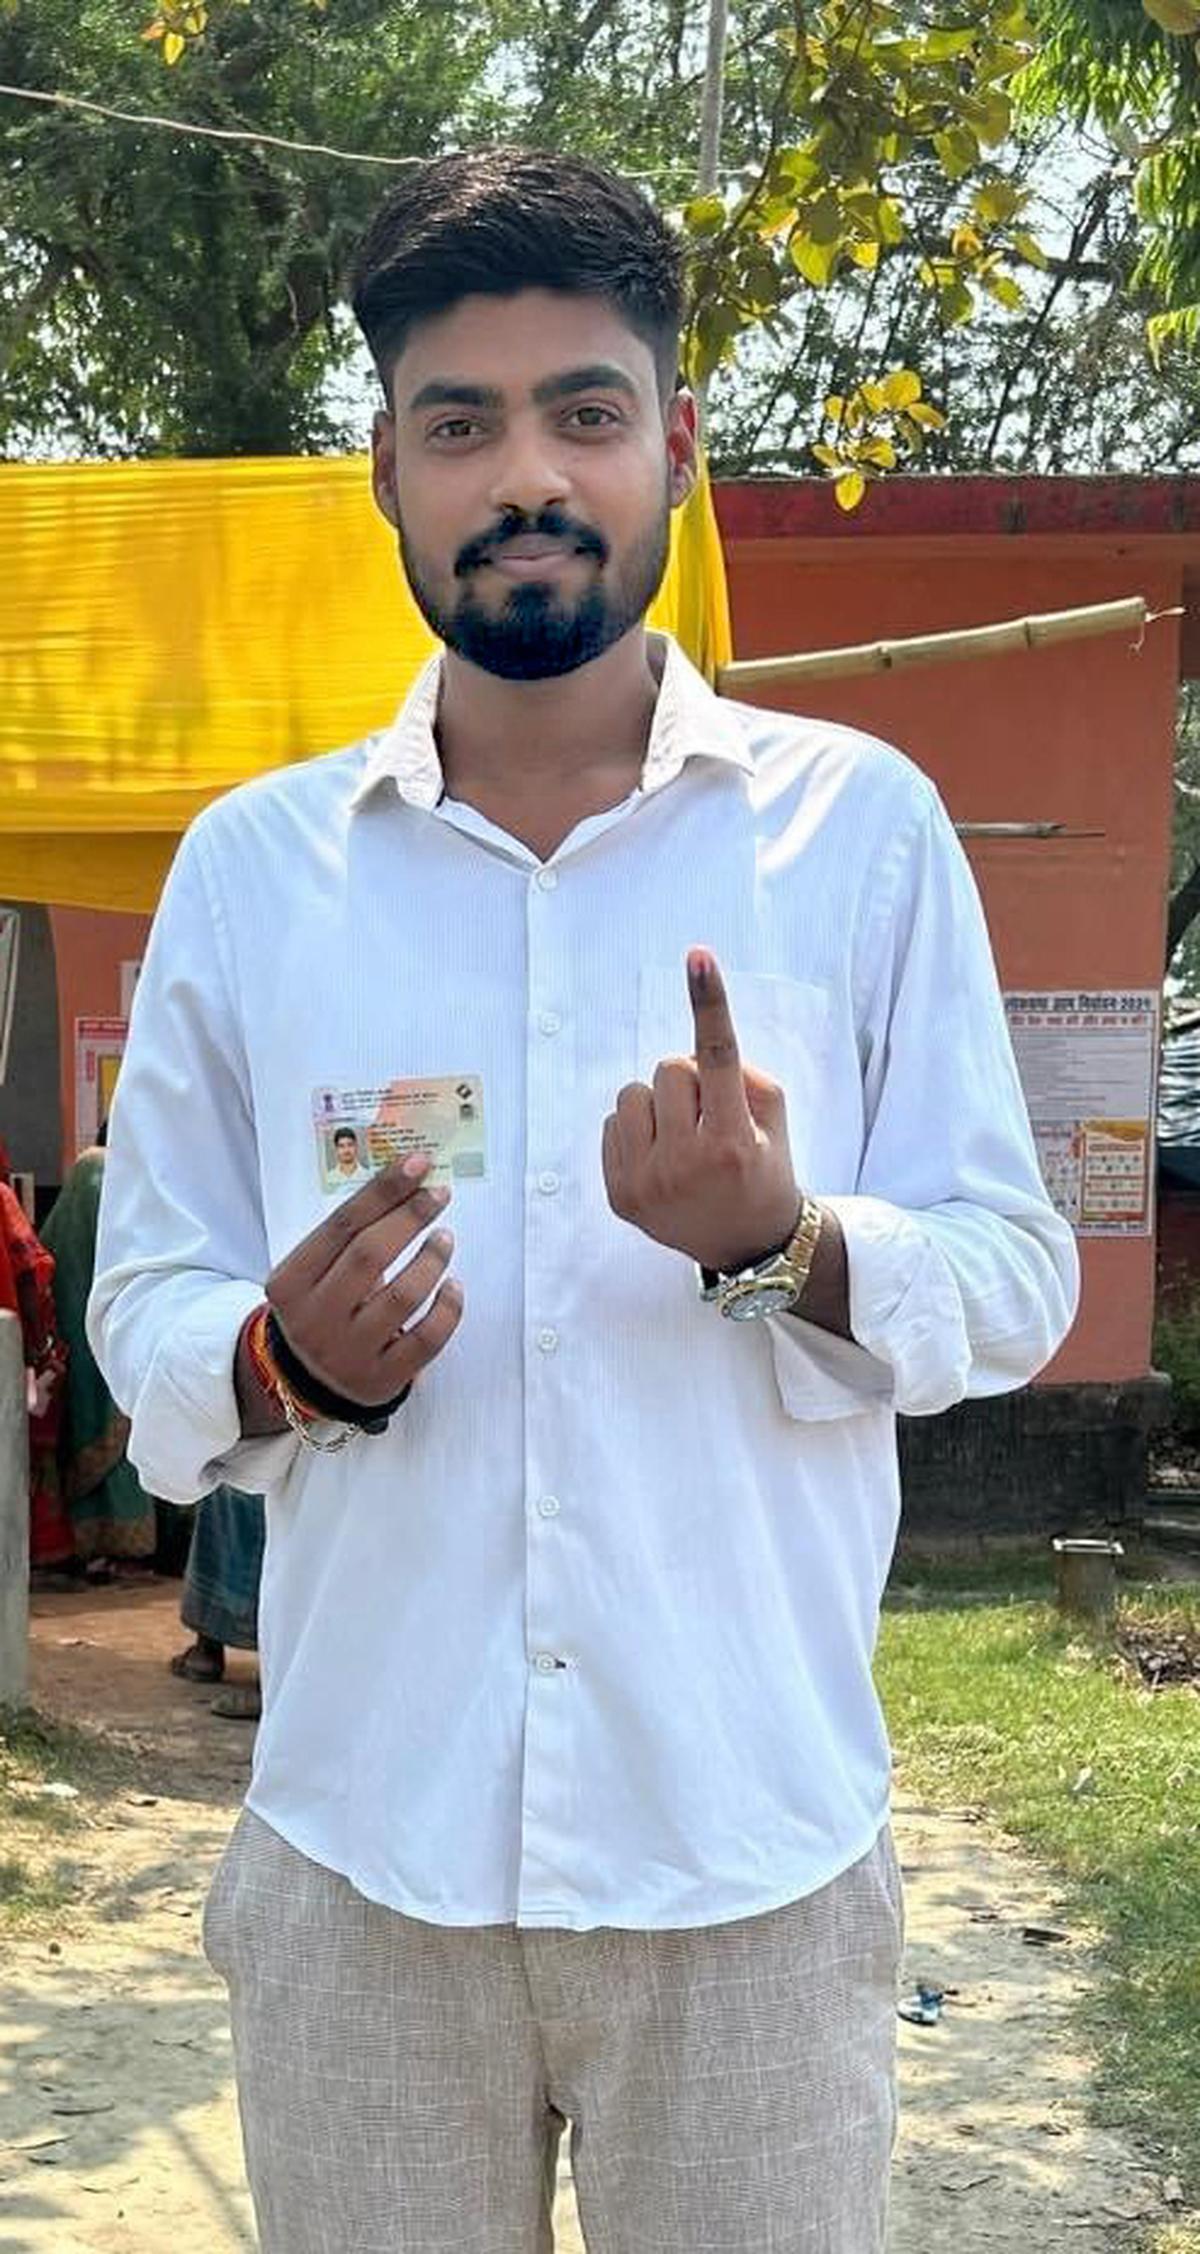 Raj showing off his inked finger and voter ID after exercising his franchise for the first time.